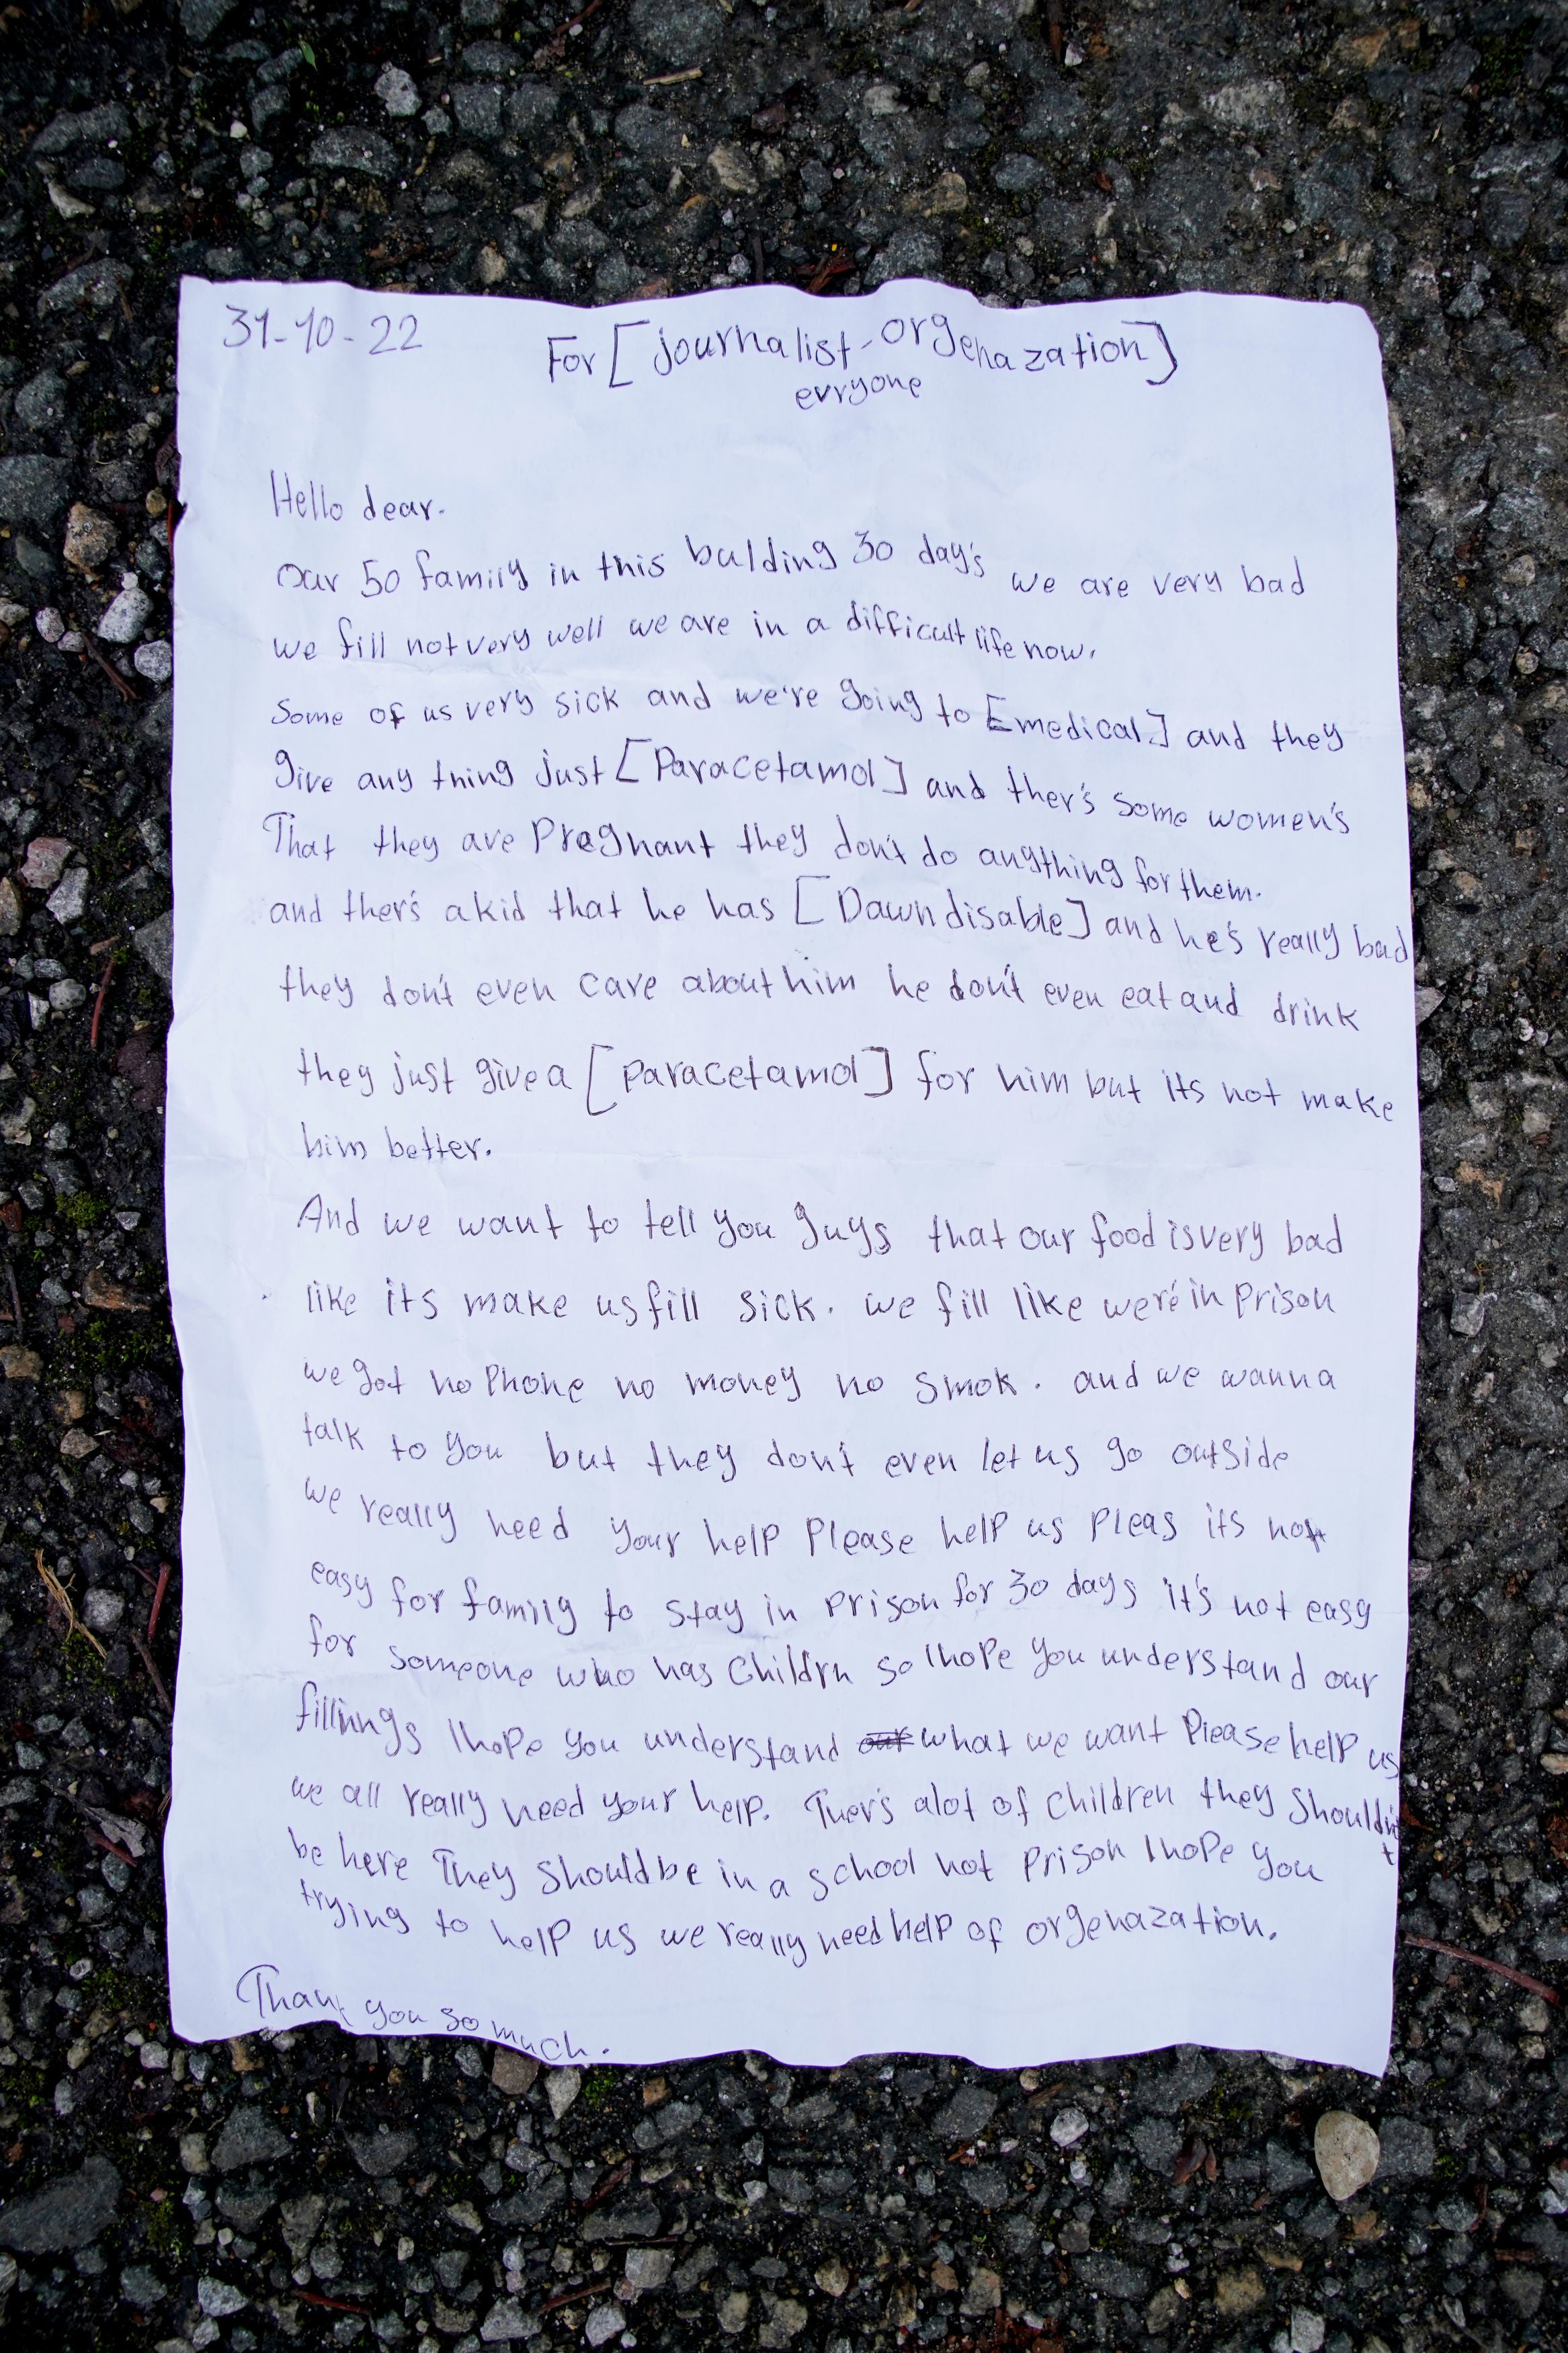 The letter thrown by a young girl over the fence at the Manston immigration facility